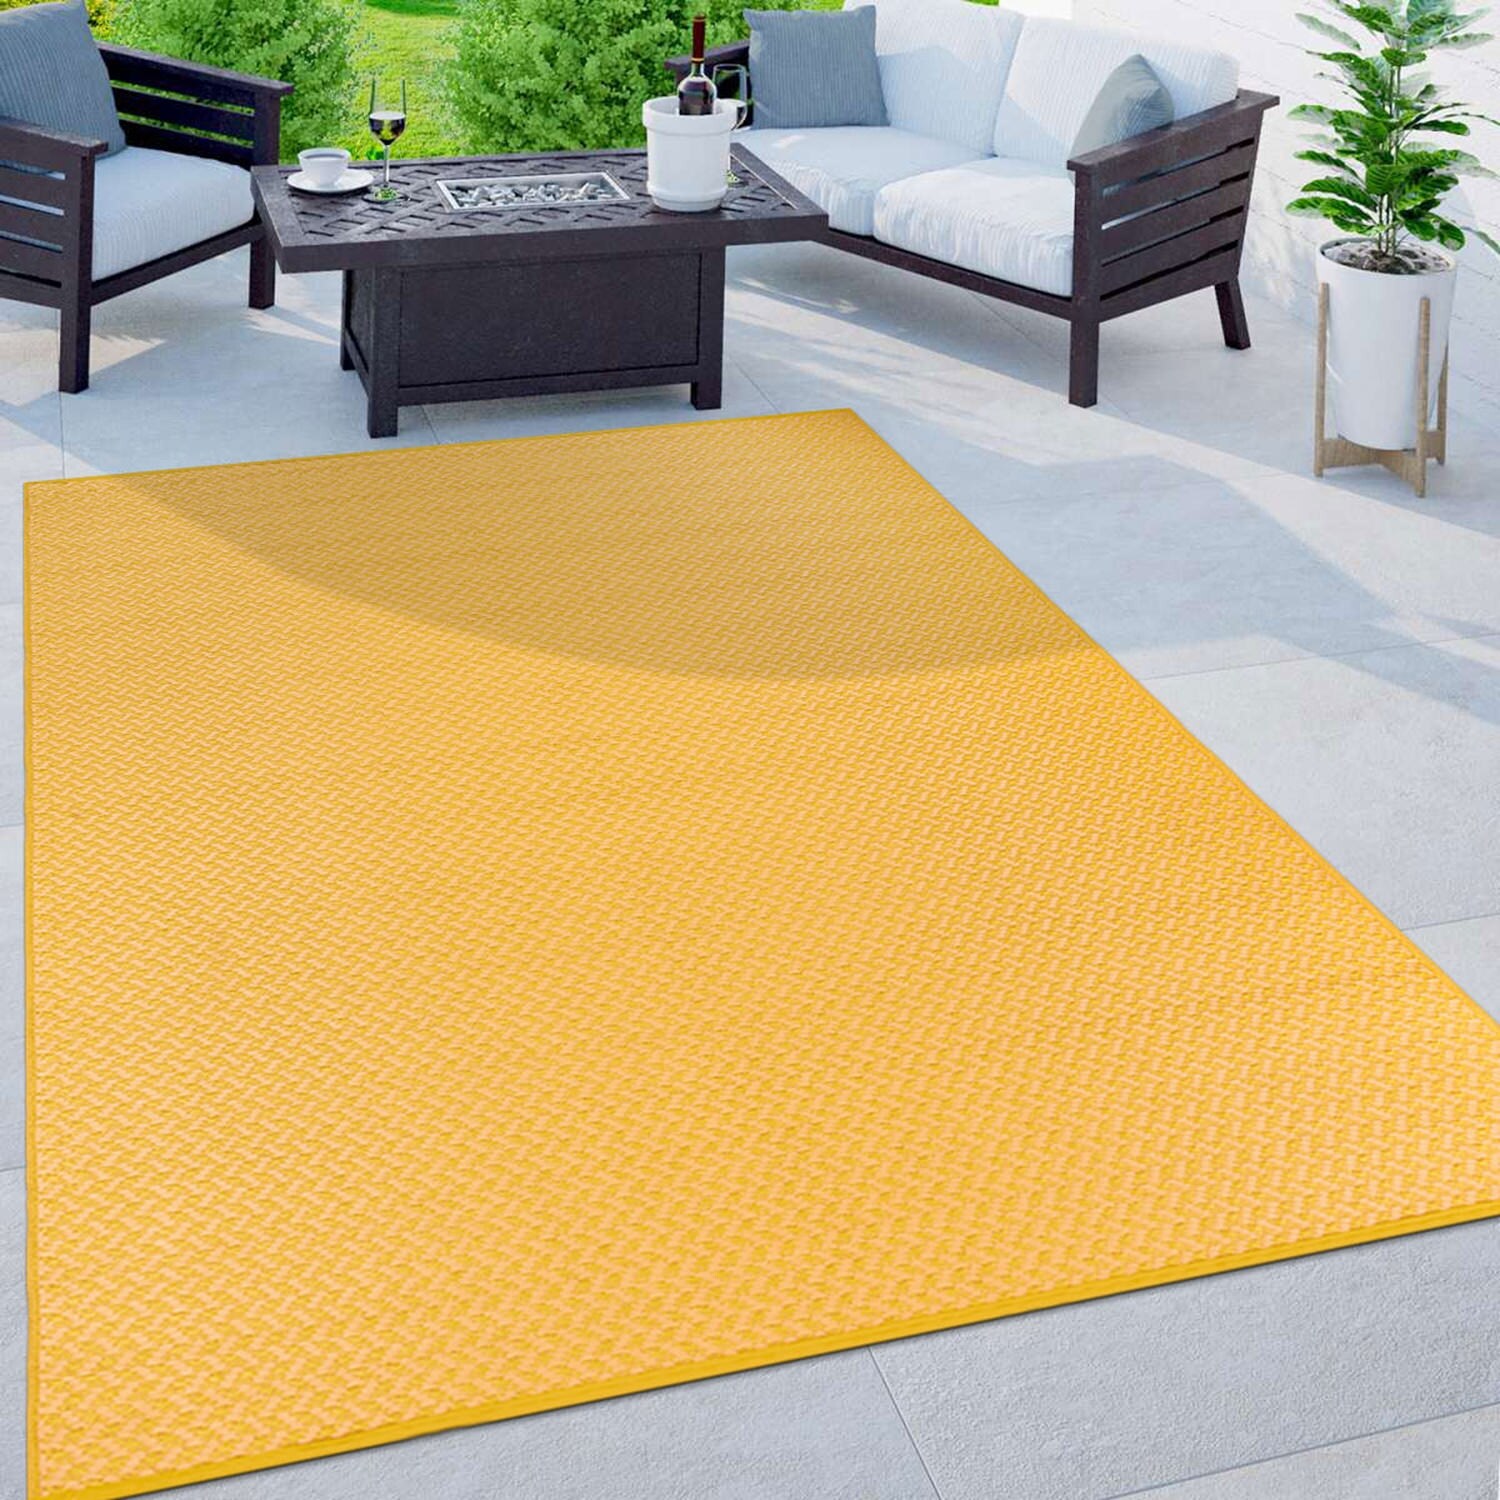 https://ak1.ostkcdn.com/images/products/is/images/direct/1856da78bf82ebb258de480d352757654c6b978c/Contemporay-Solid-Reversible-Plastic-Outdoor-Rugs.jpg